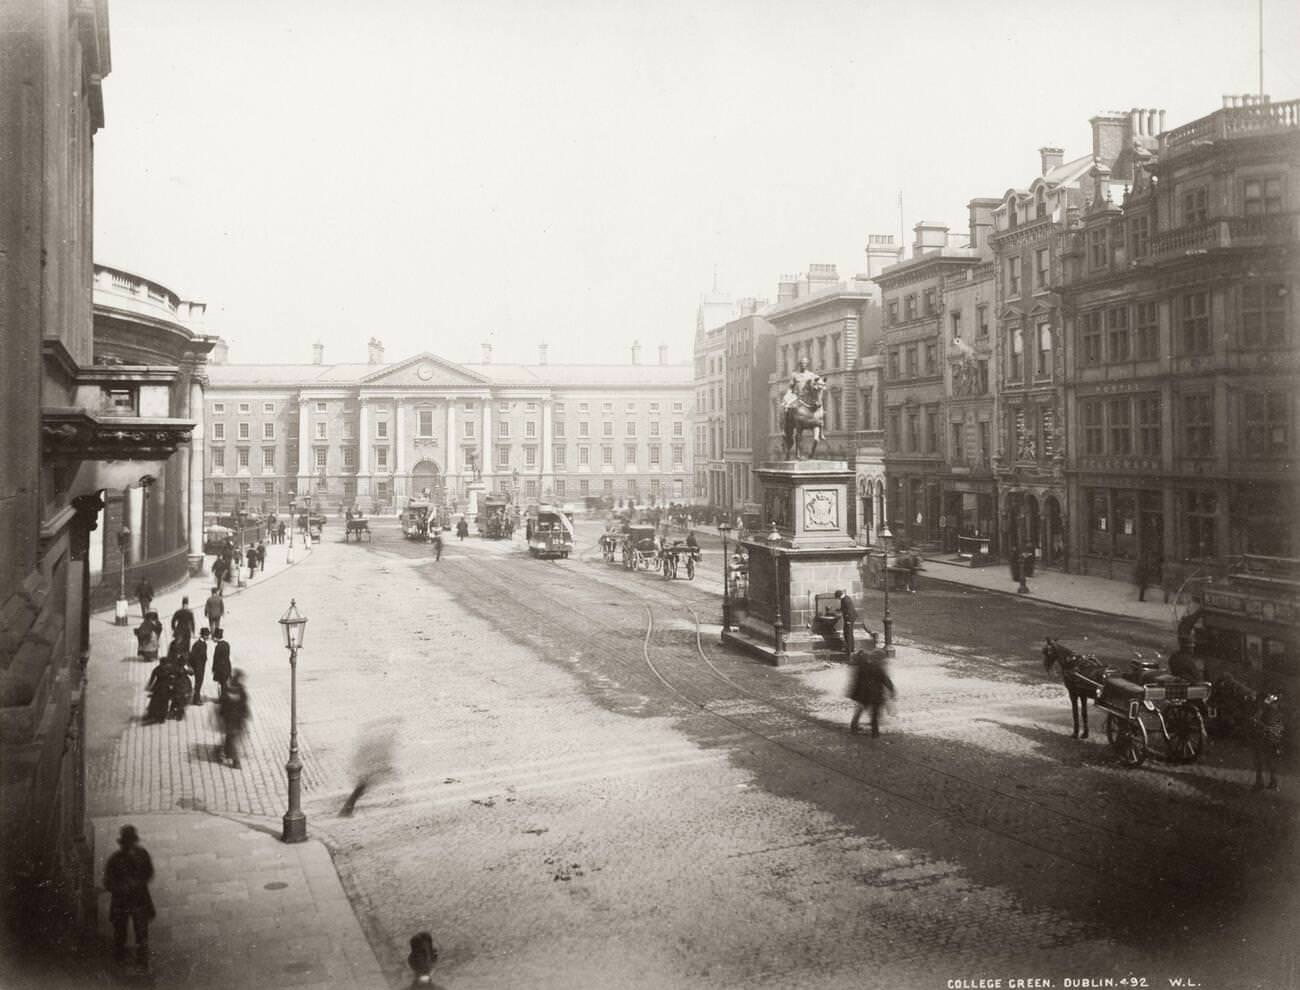 College Green Dublin, with Trinity College in the background, horses and trams, 1890s